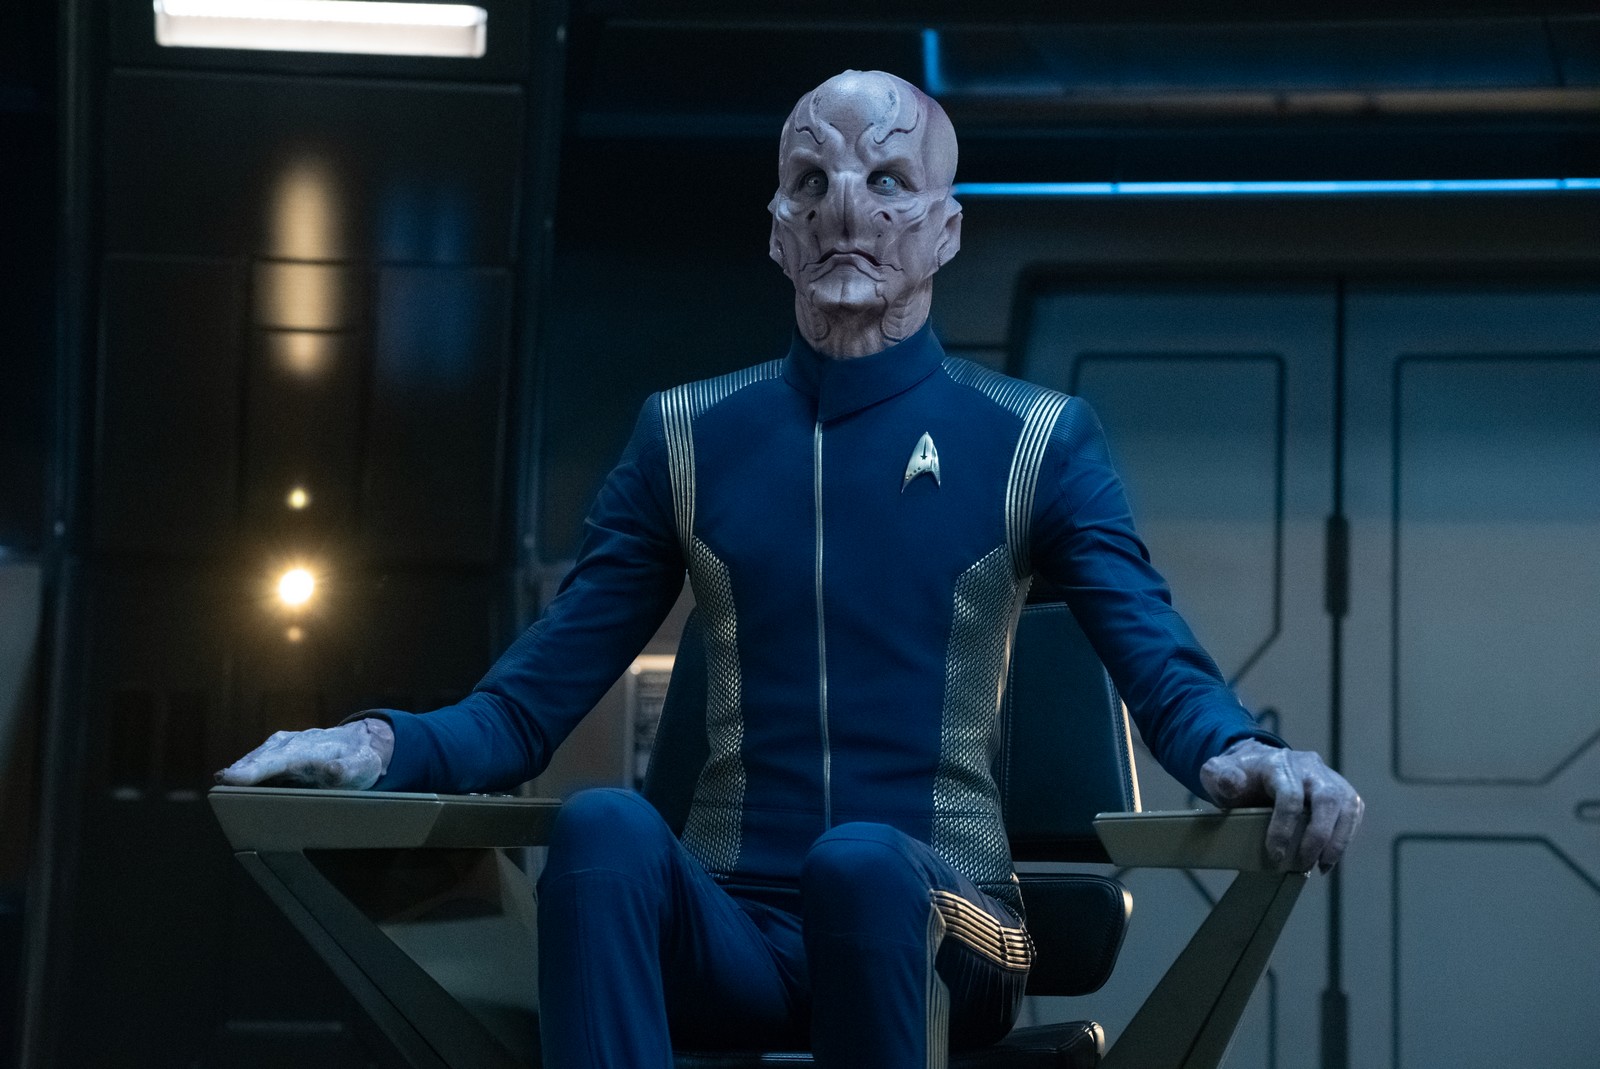 Review: 'Star Trek: Discovery' Returns To Common Ground In “People